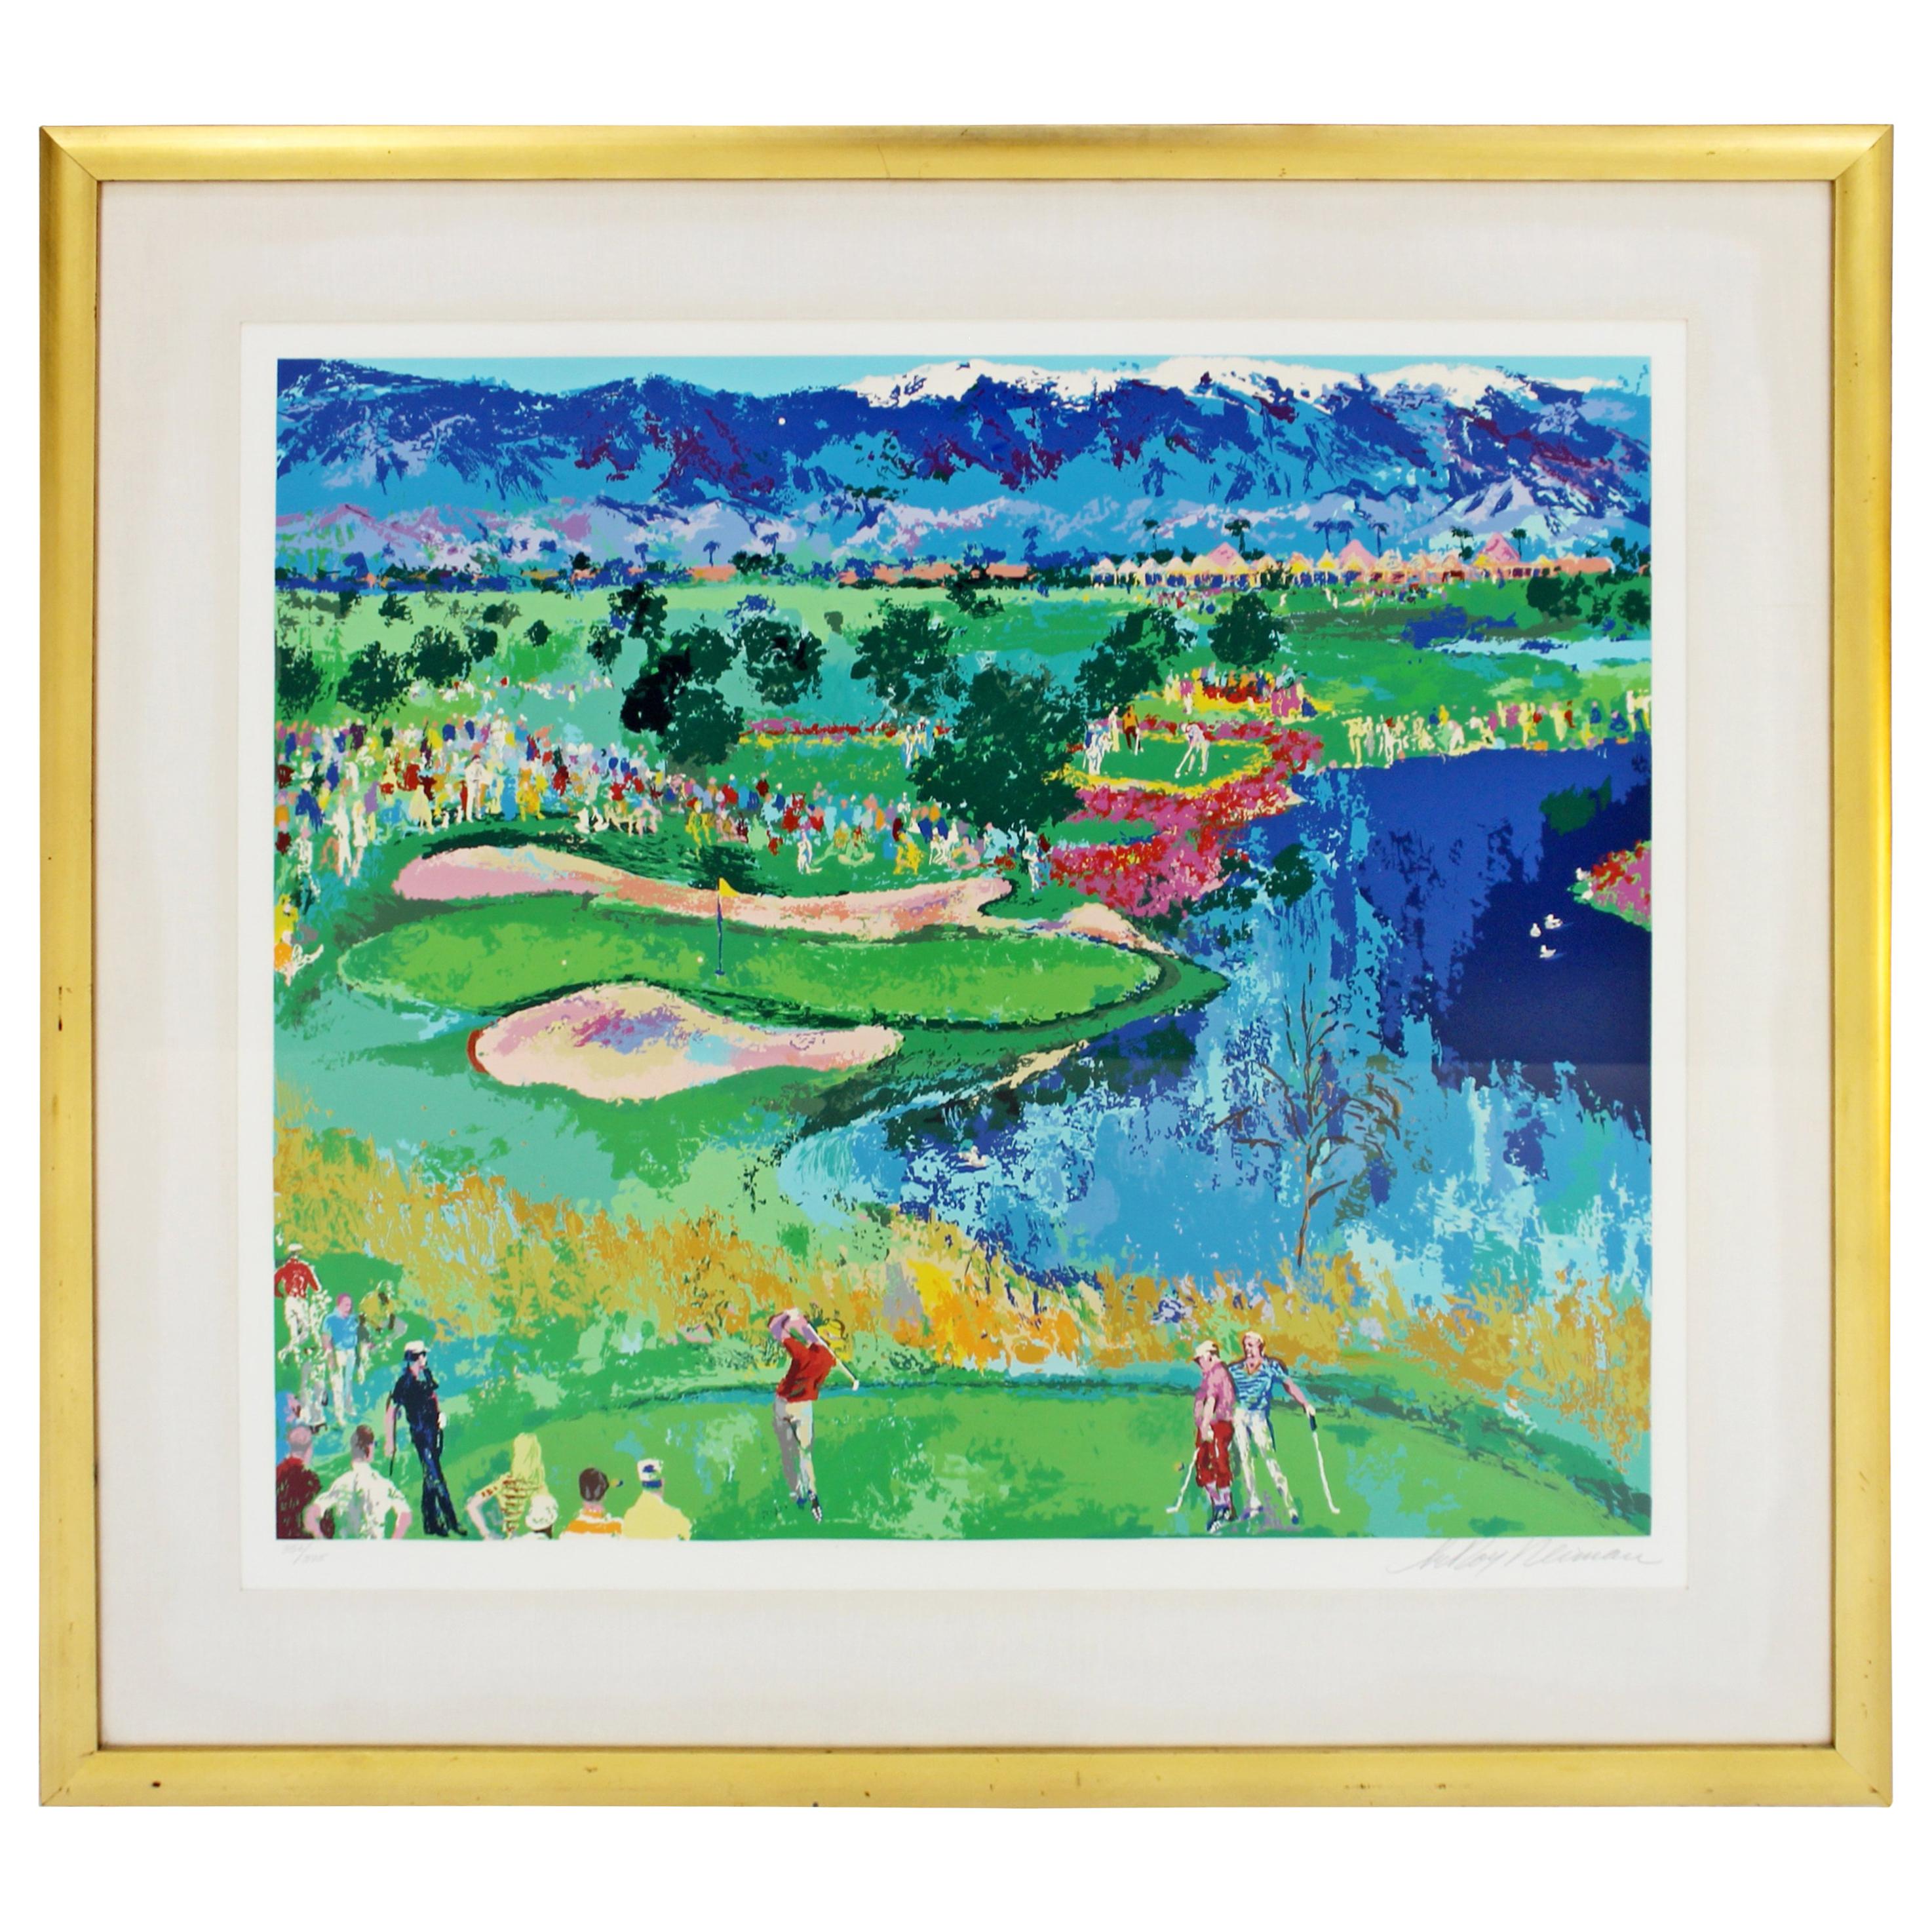 Contemporary Modern Framed The Cove at Vintage Serigraph by Leroy Neiman 356/375